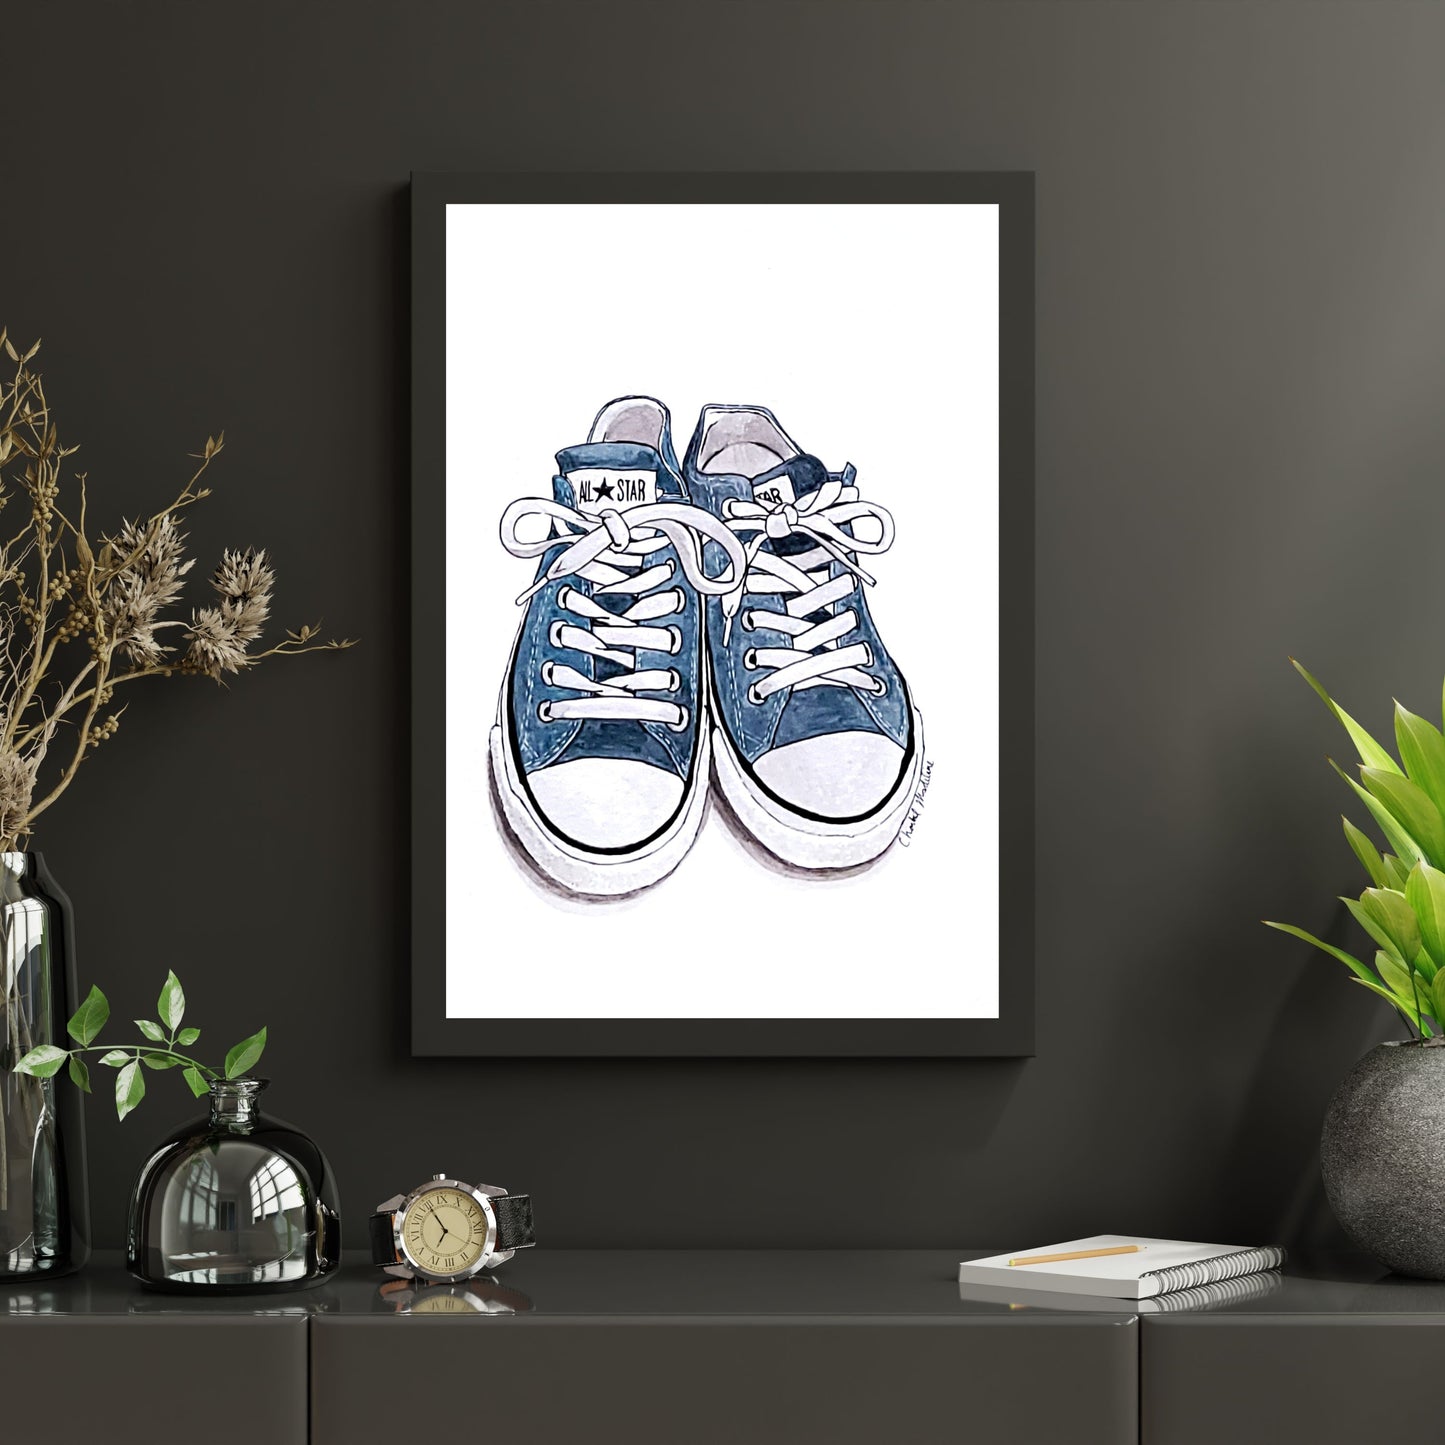 Blue all star converse shoes, Shoe lover art, Giclee print on fine art paper